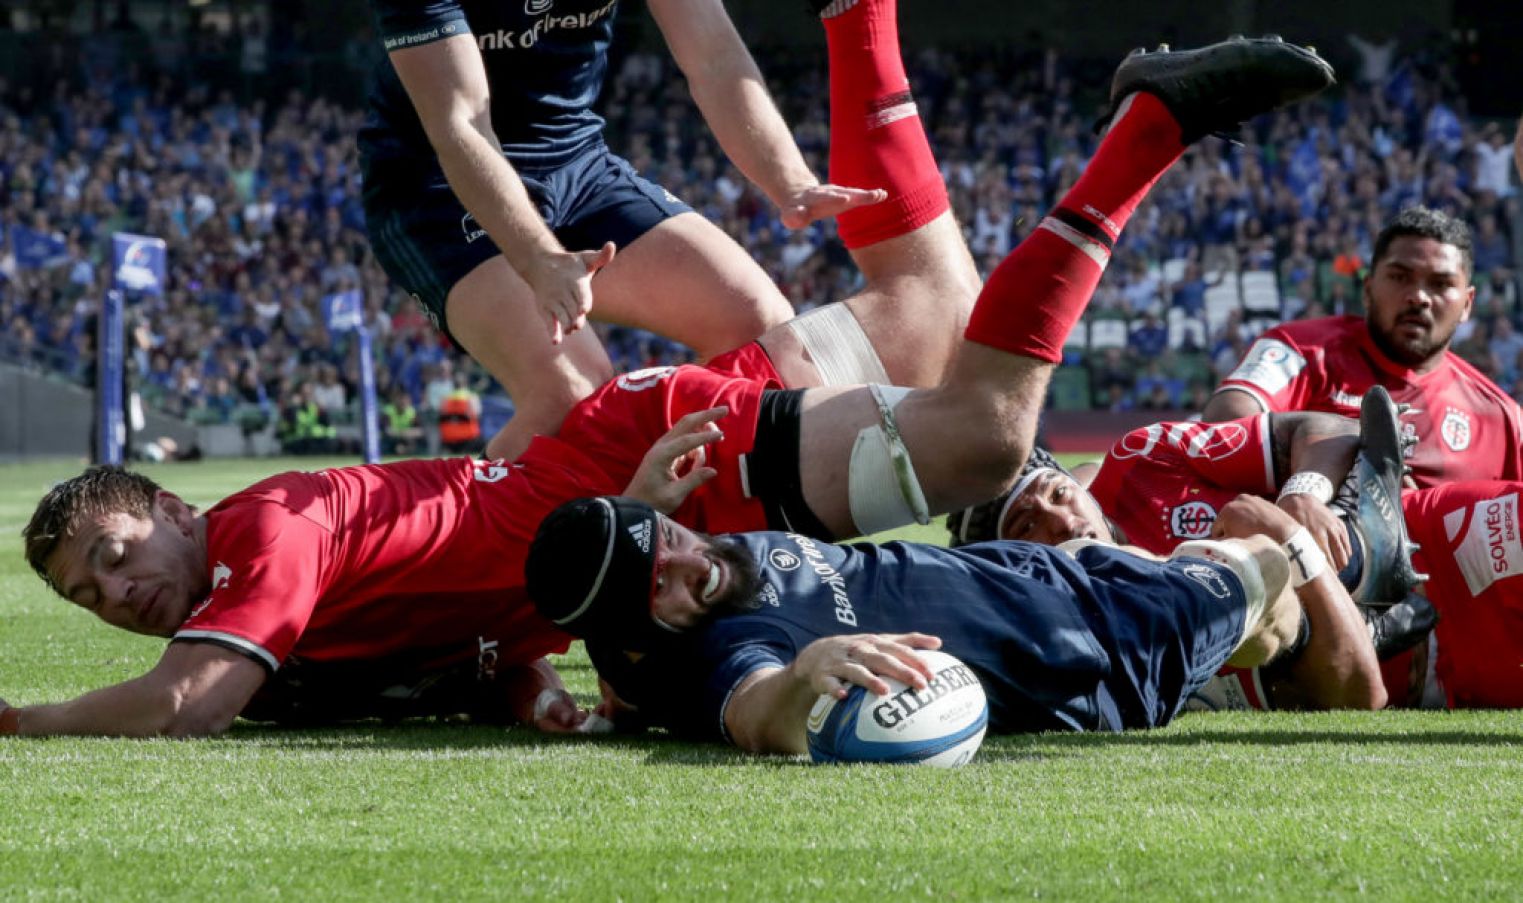 Fardy Scoring Against Scarlets In The Champions Cup Semi-Final Against Scarlets ©Inpho/Billy Stickland